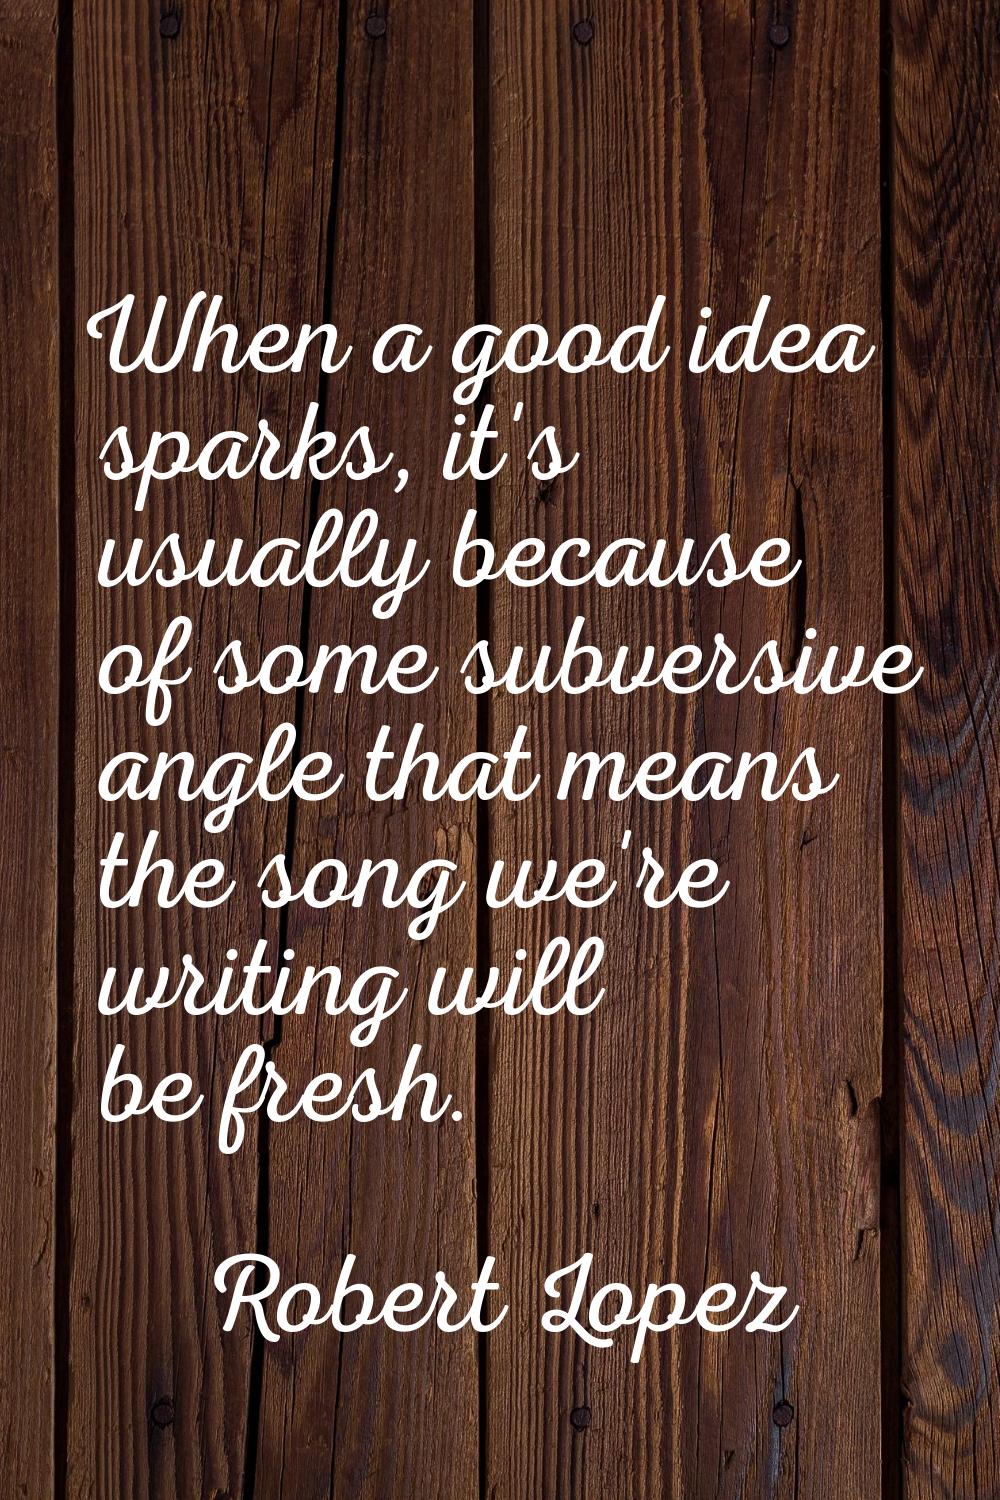 When a good idea sparks, it's usually because of some subversive angle that means the song we're wr